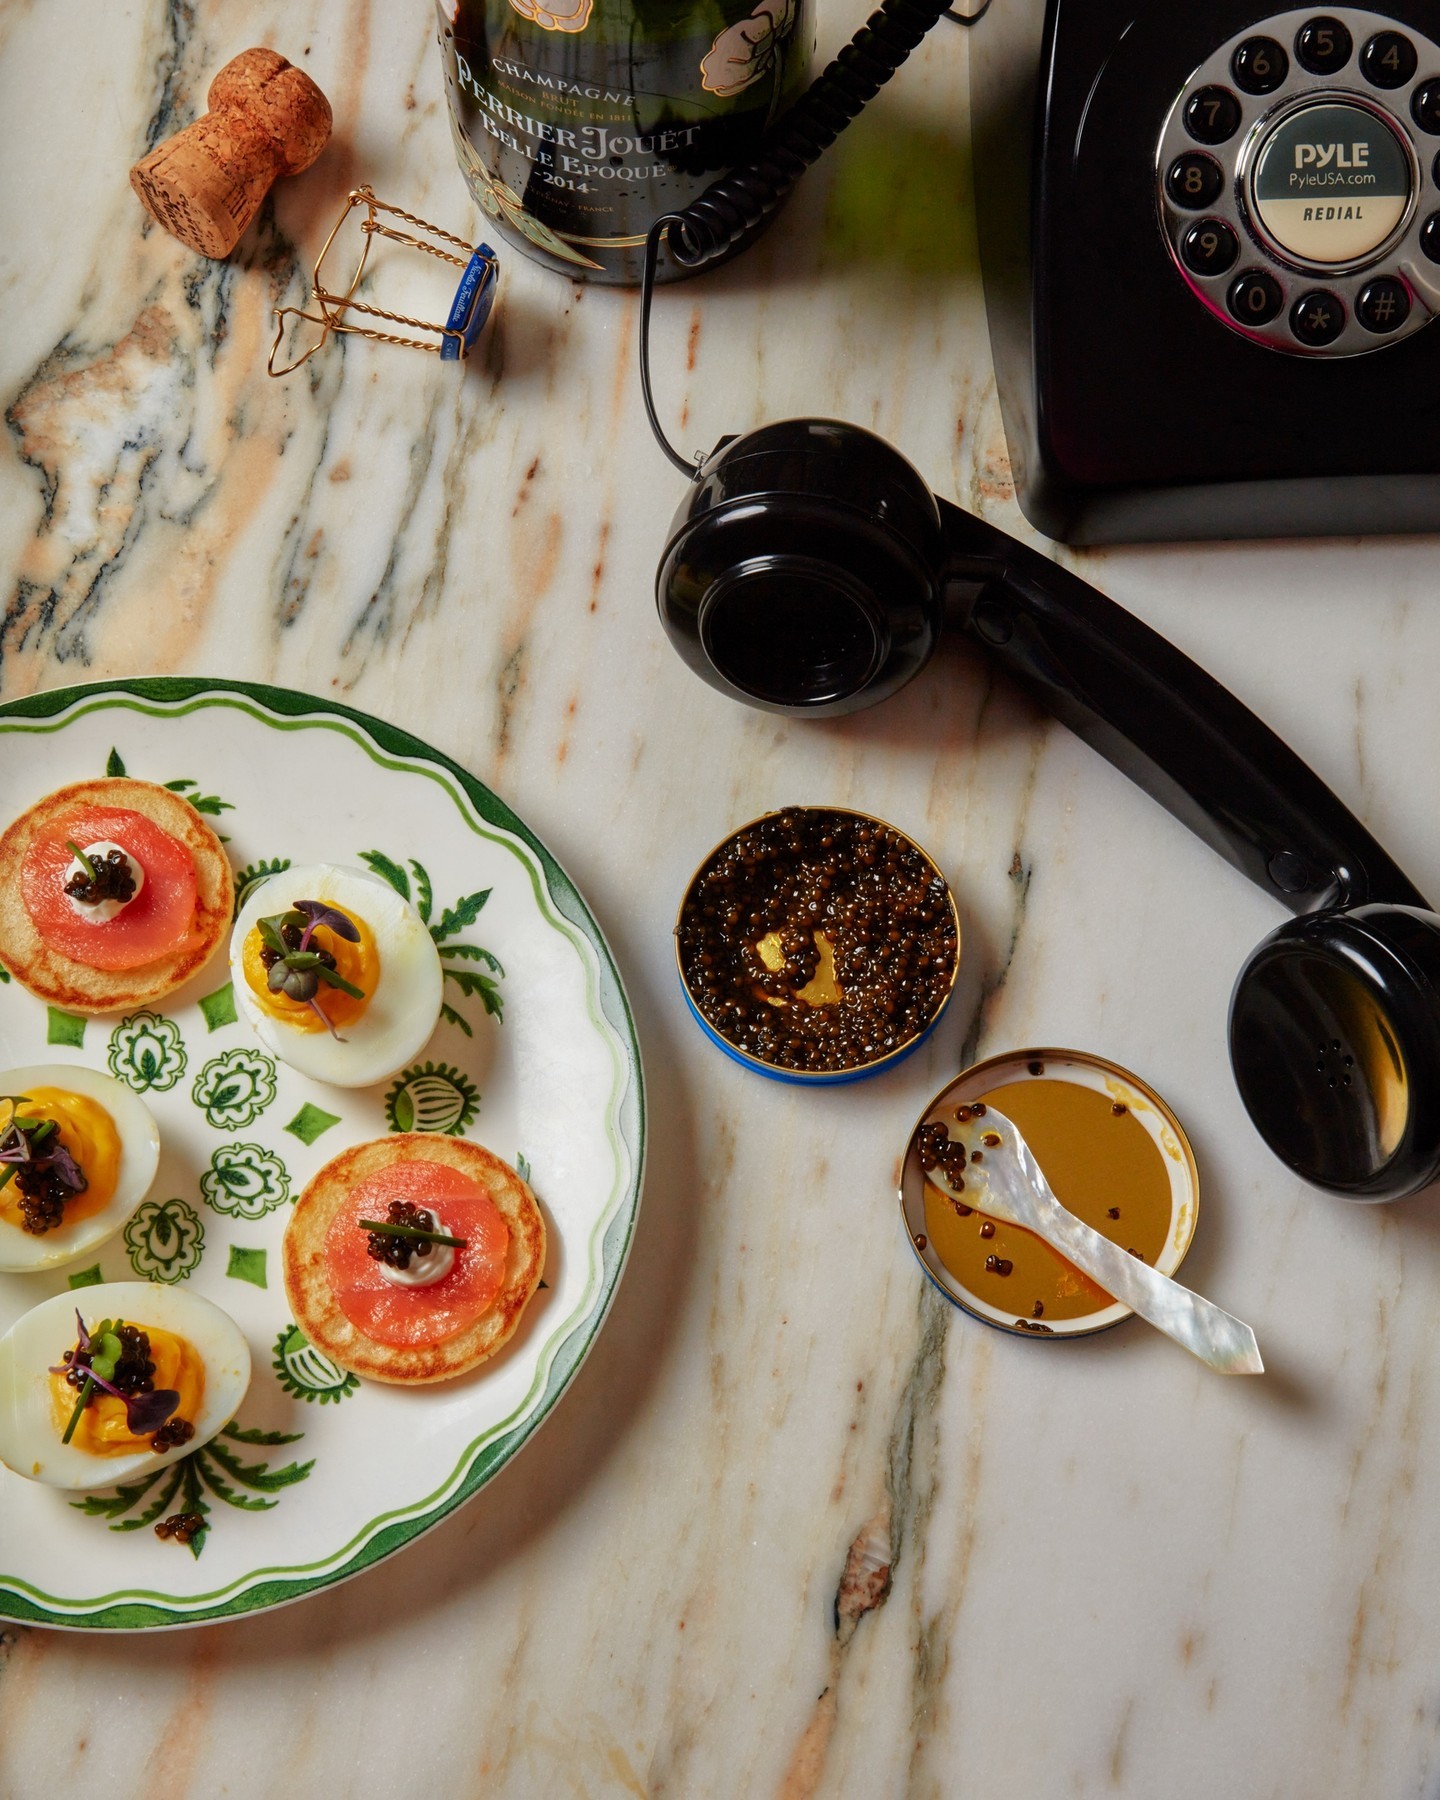 hello you’ve reached the caviar hotline - what will it be? smoked salmon blinis with caviar and crème fraîche? caviar nachos? deviled eggs with caviar? ⁠
⁠
dial ‘5’ for 24/7 caviar delivered to your room, and choose from a range of caviar delicacies 📞 ⁠
⁠
photo: @emmafishman